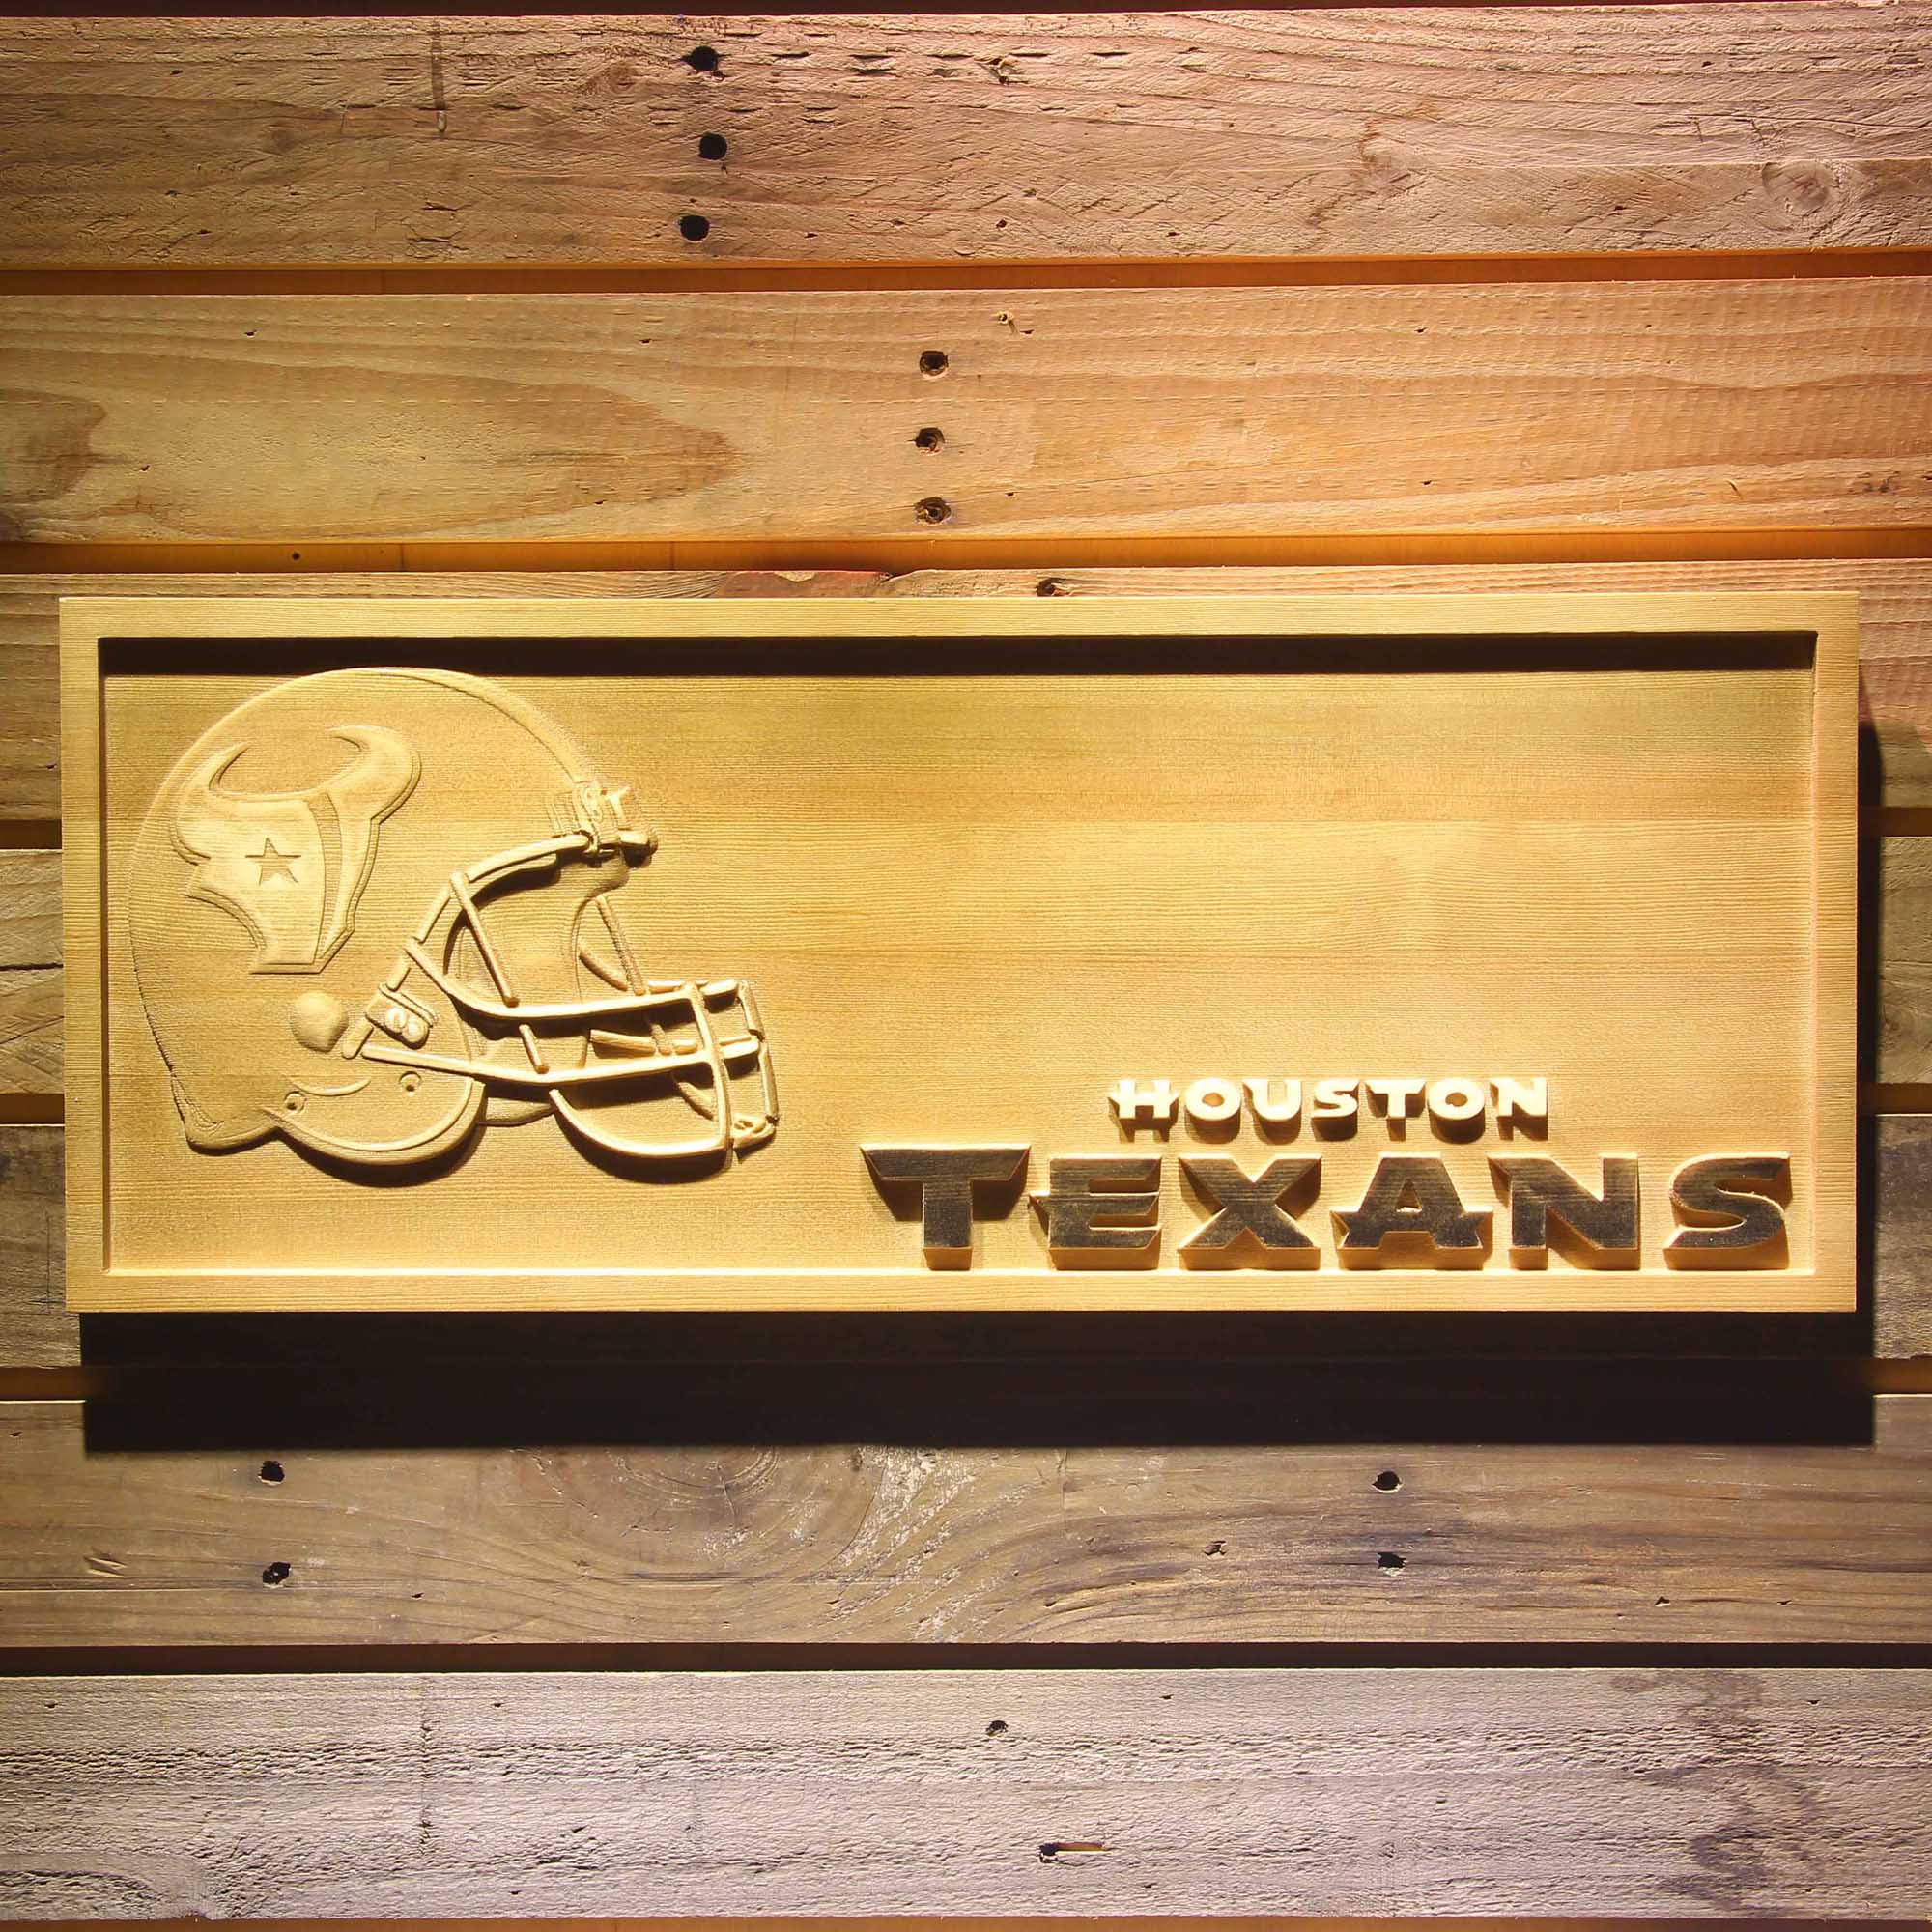 Houston Texans 3D Solid Wooden Craving Sign